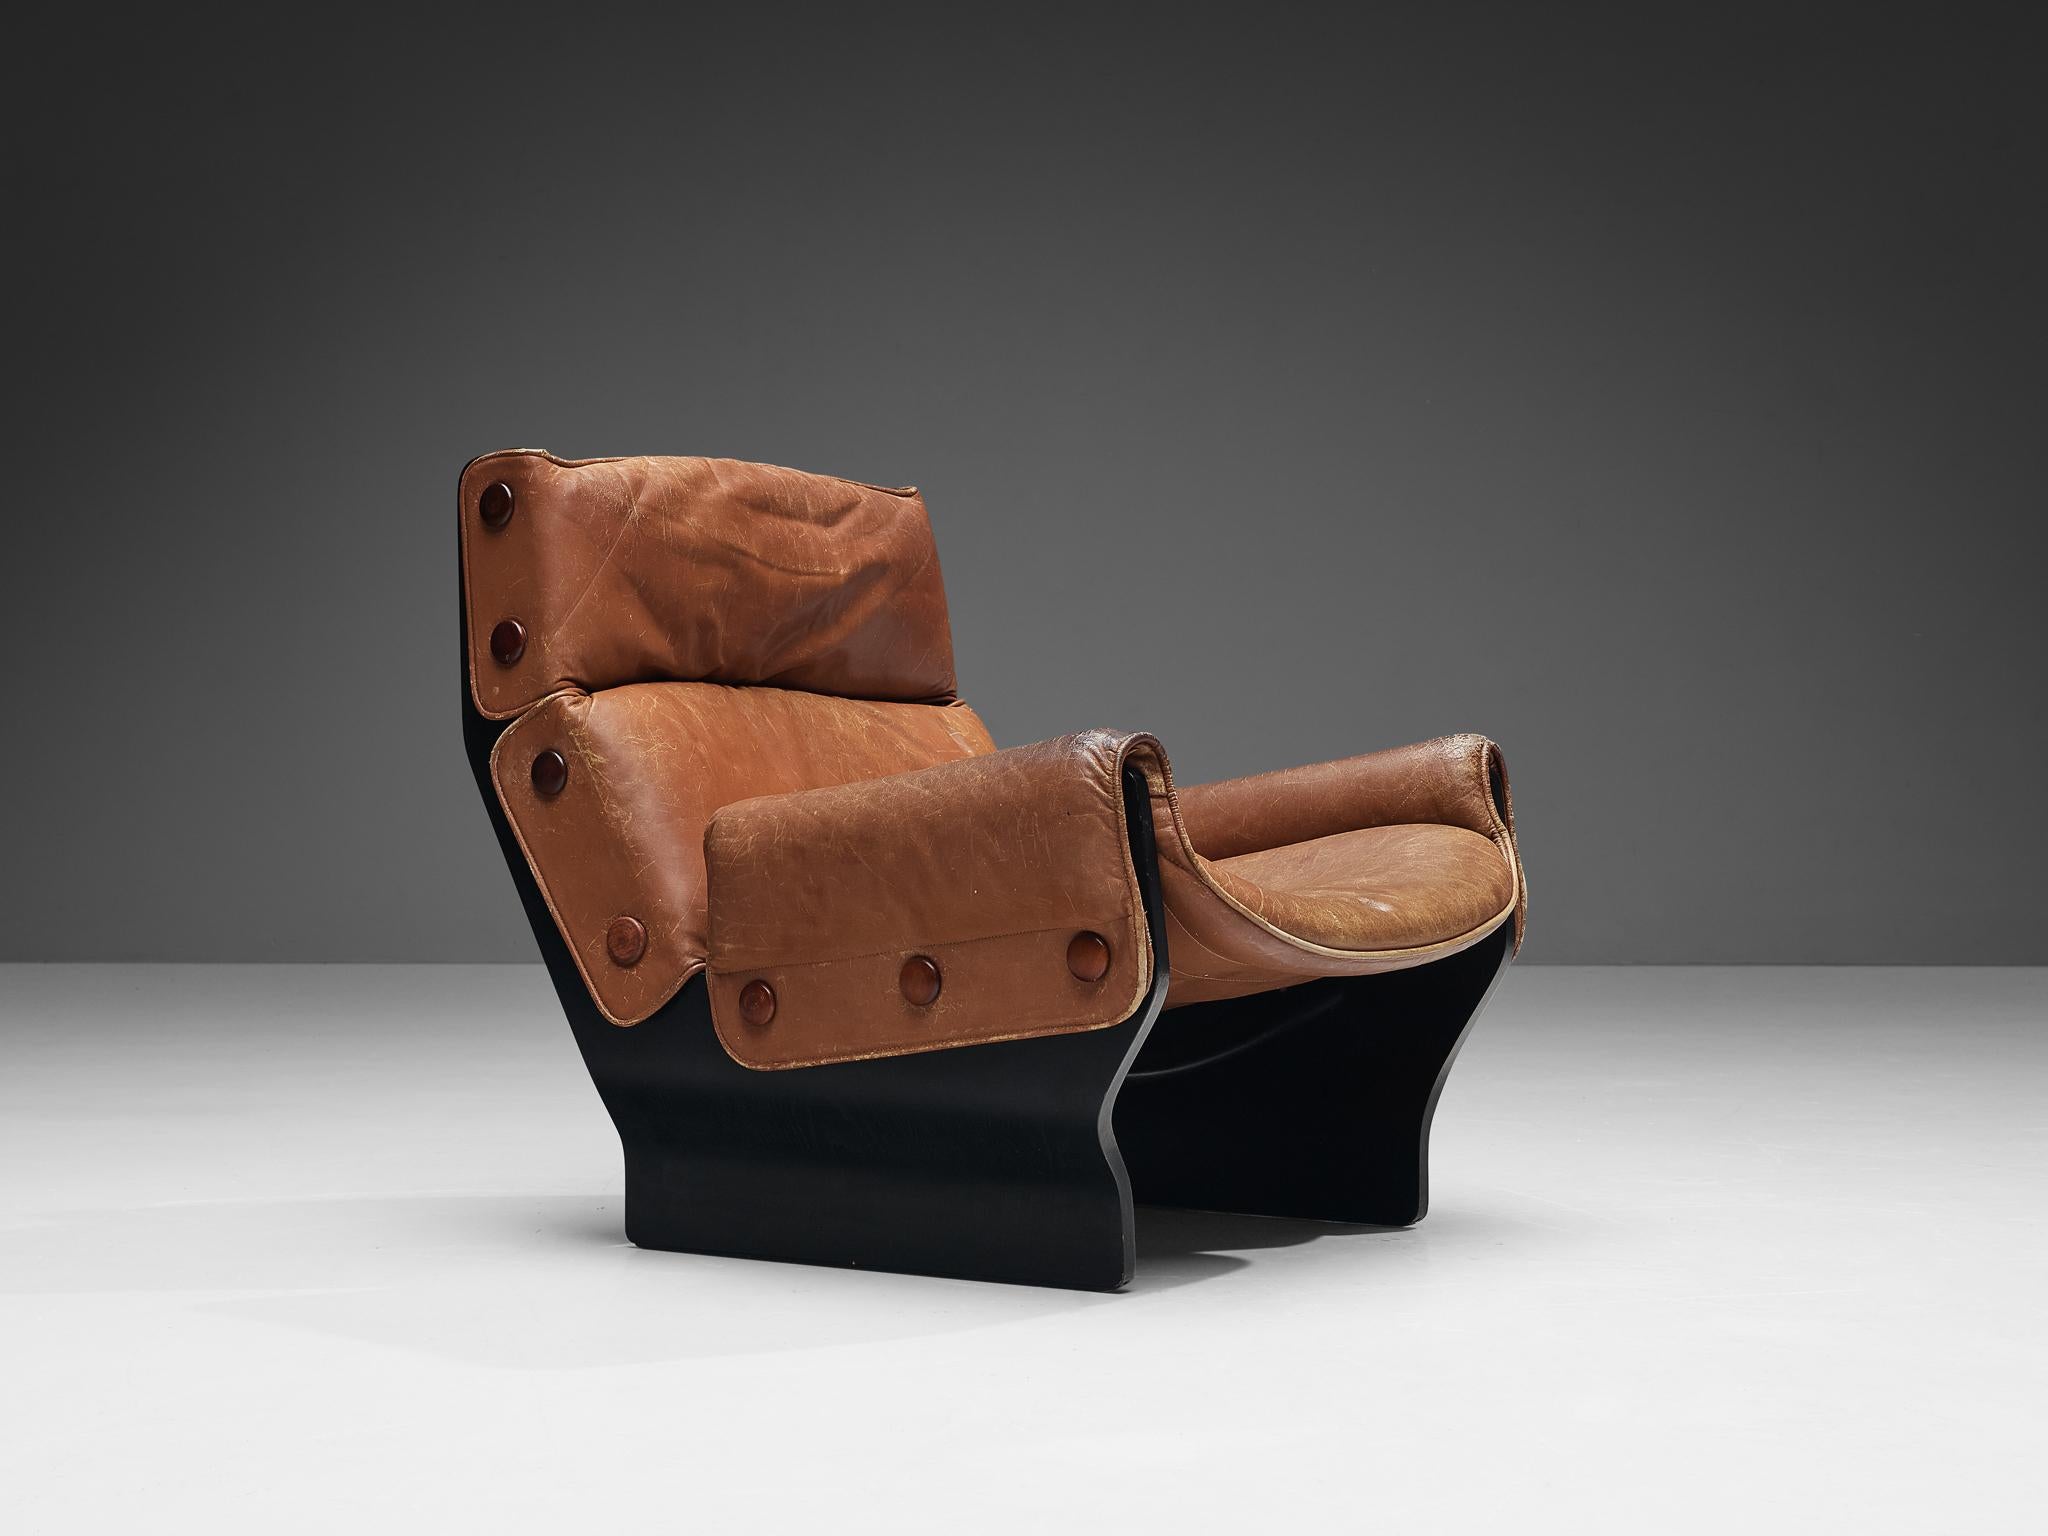 Osvaldo Borsani, Valeria Borsani, and Marco Fantoni for Tecno, 'Canada' lounge chair, model 'T110', leather, plywood, Italy, 1966

The Canada series was developed from some rough initial sketches by Valeria Borsani and Marco Fantoni while they were